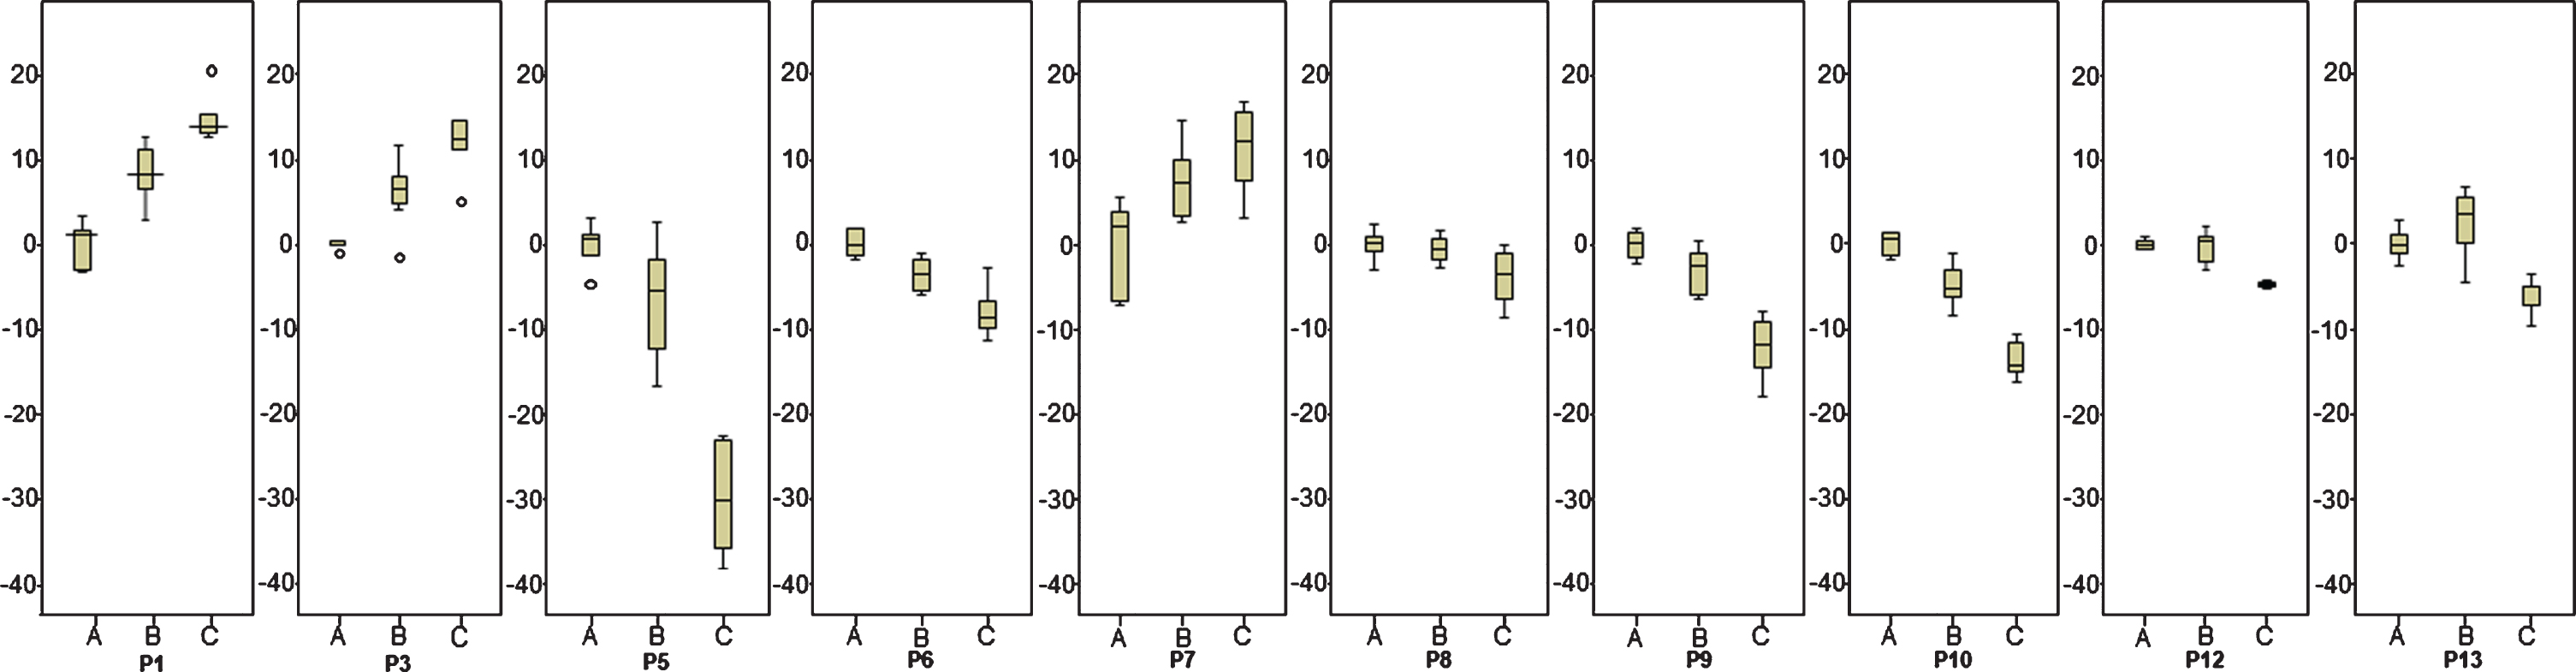 Boxplots of Action Research Arm Test residuals. Action Research Arm Test within-subject residuals for all subjects for Phase A, Phase B and Phase C.